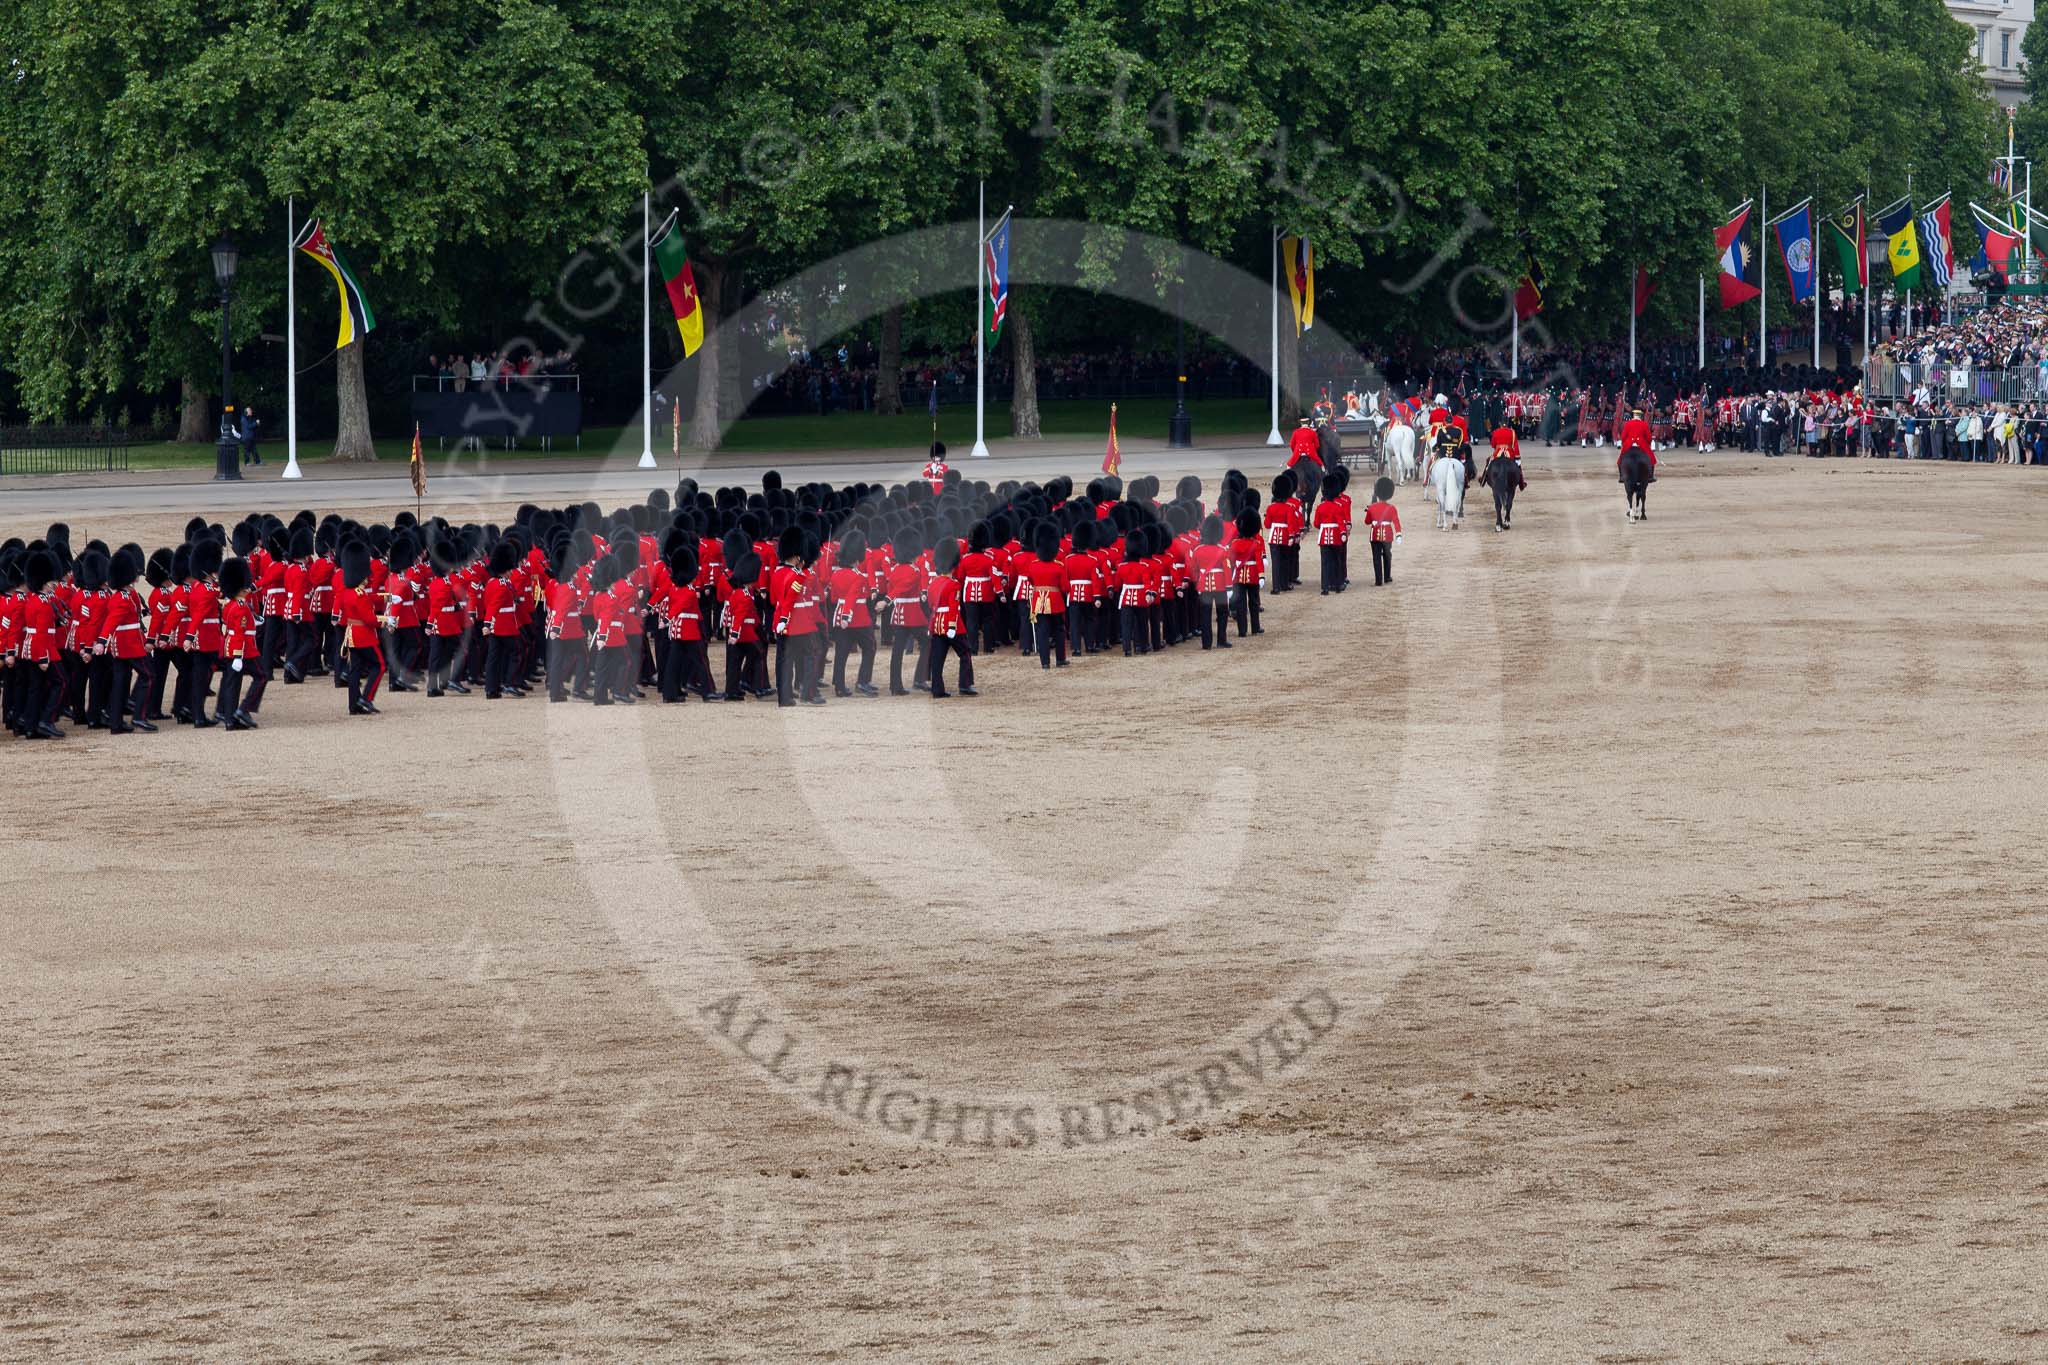 Trooping the Colour 2011: The March Off. Following the Massed Bands and the Royal Procession, the six guard divisions are about to leave the parade ground..
Horse Guards Parade, Westminster,
London SW1,
Greater London,
United Kingdom,
on 11 June 2011 at 12:11, image #424